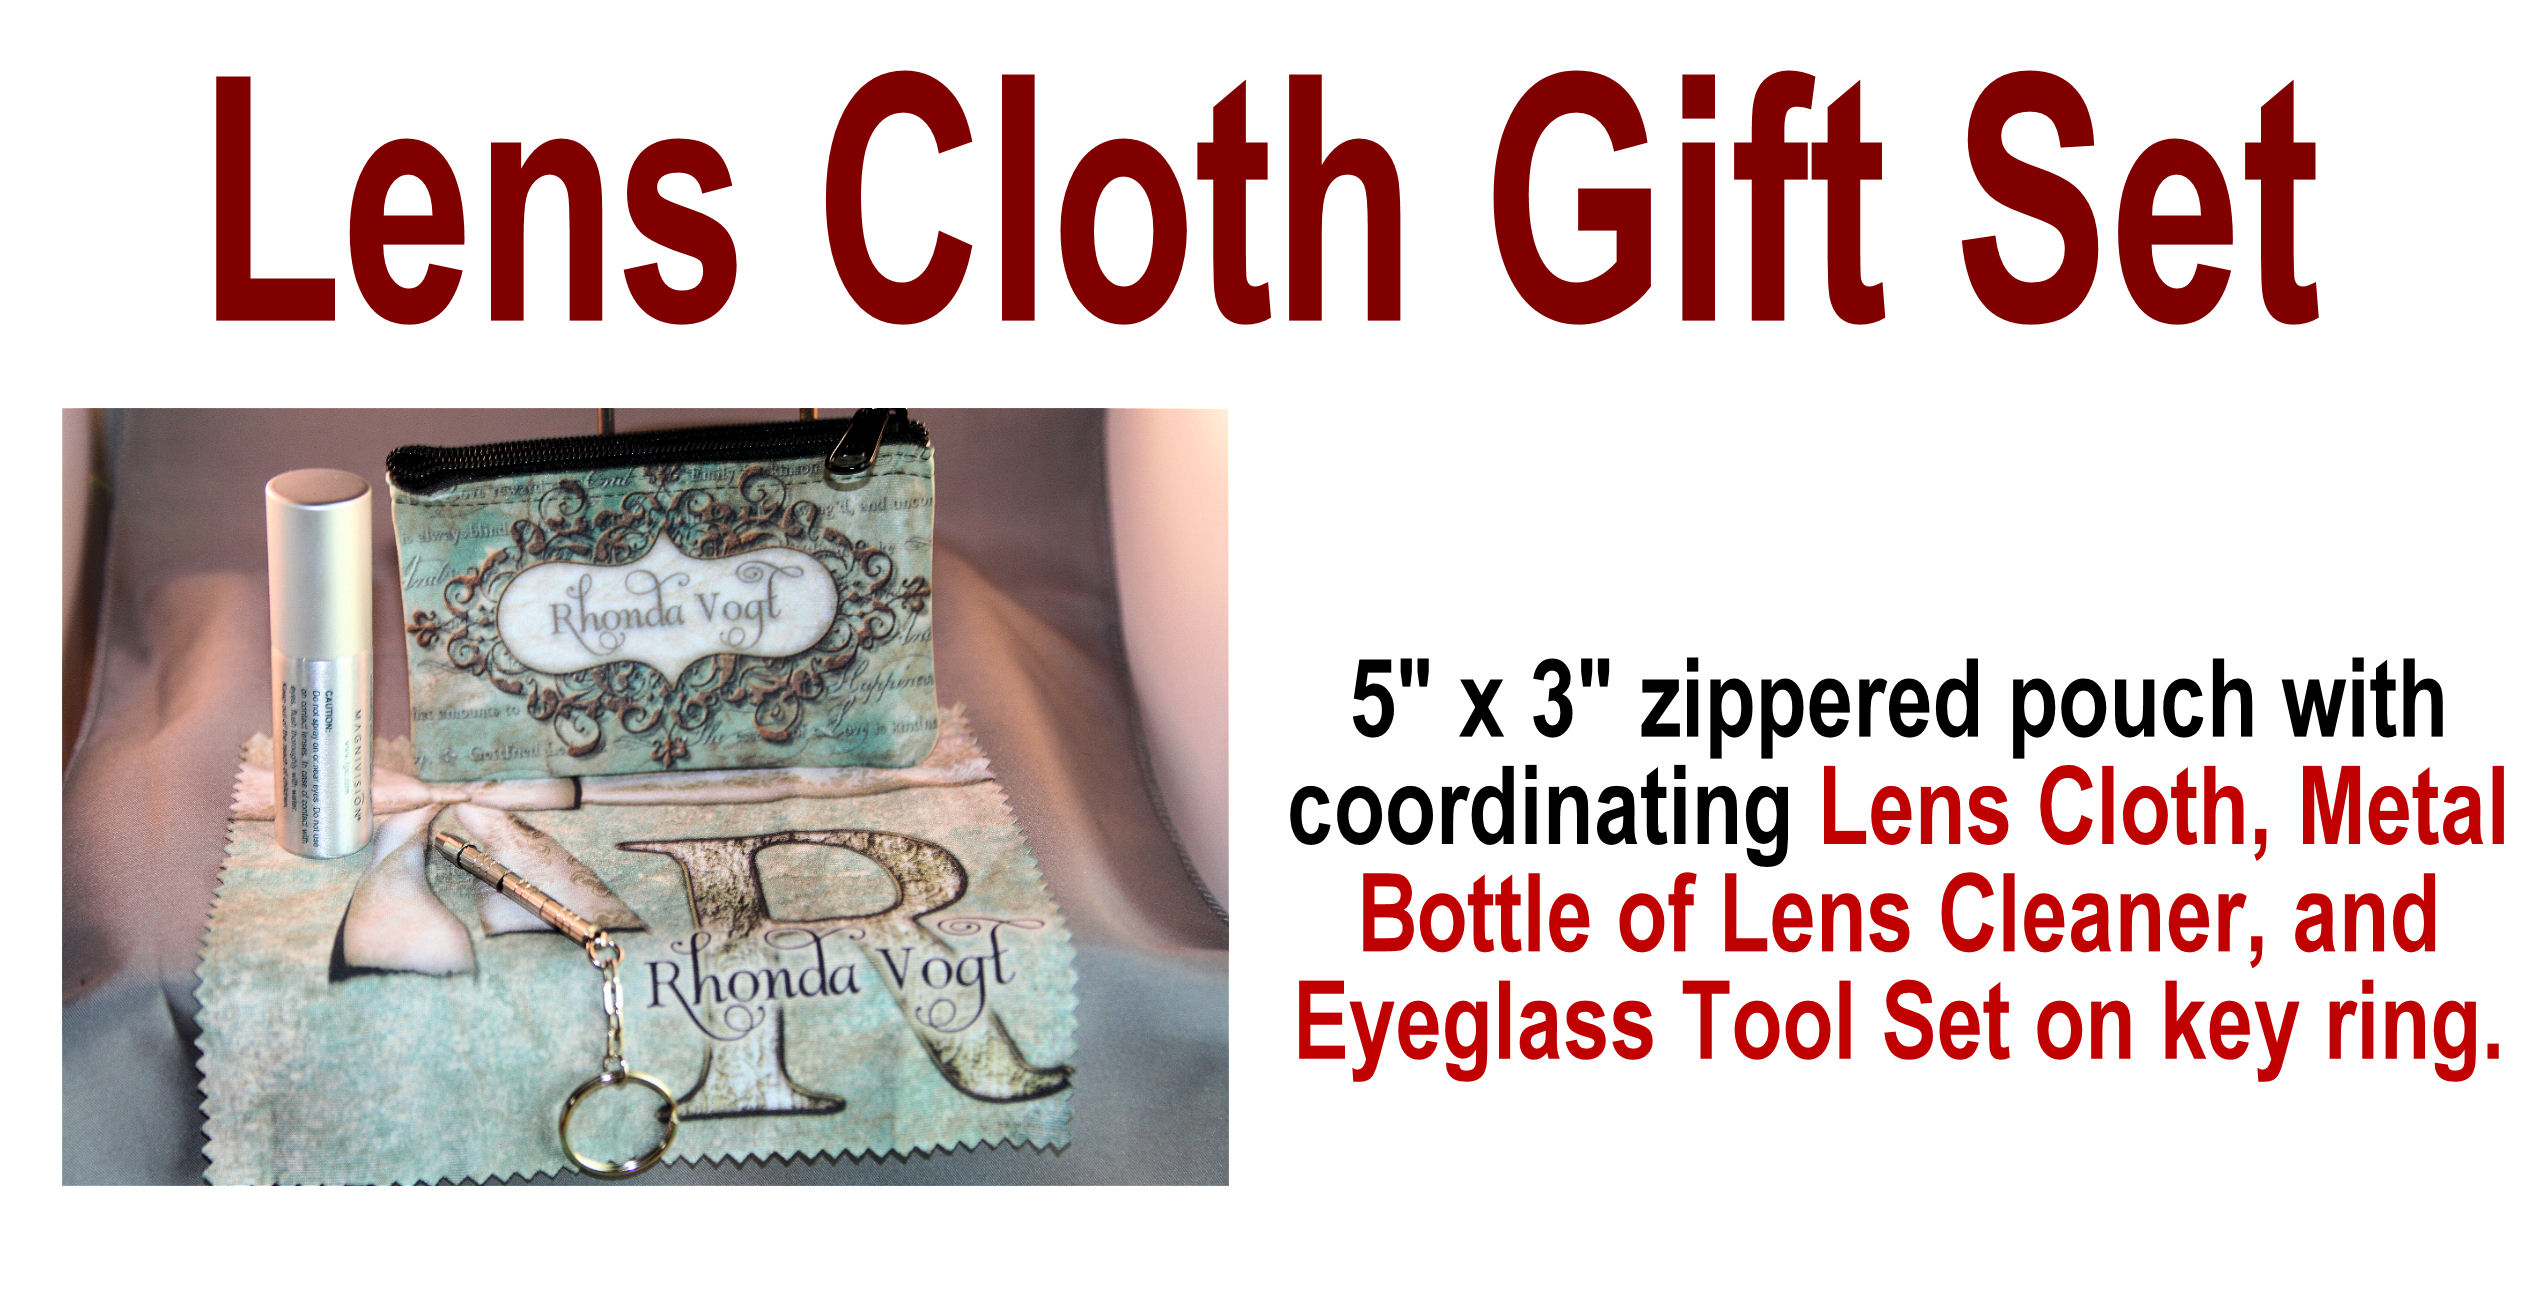 Lens Cloth Set made with sublimation printing